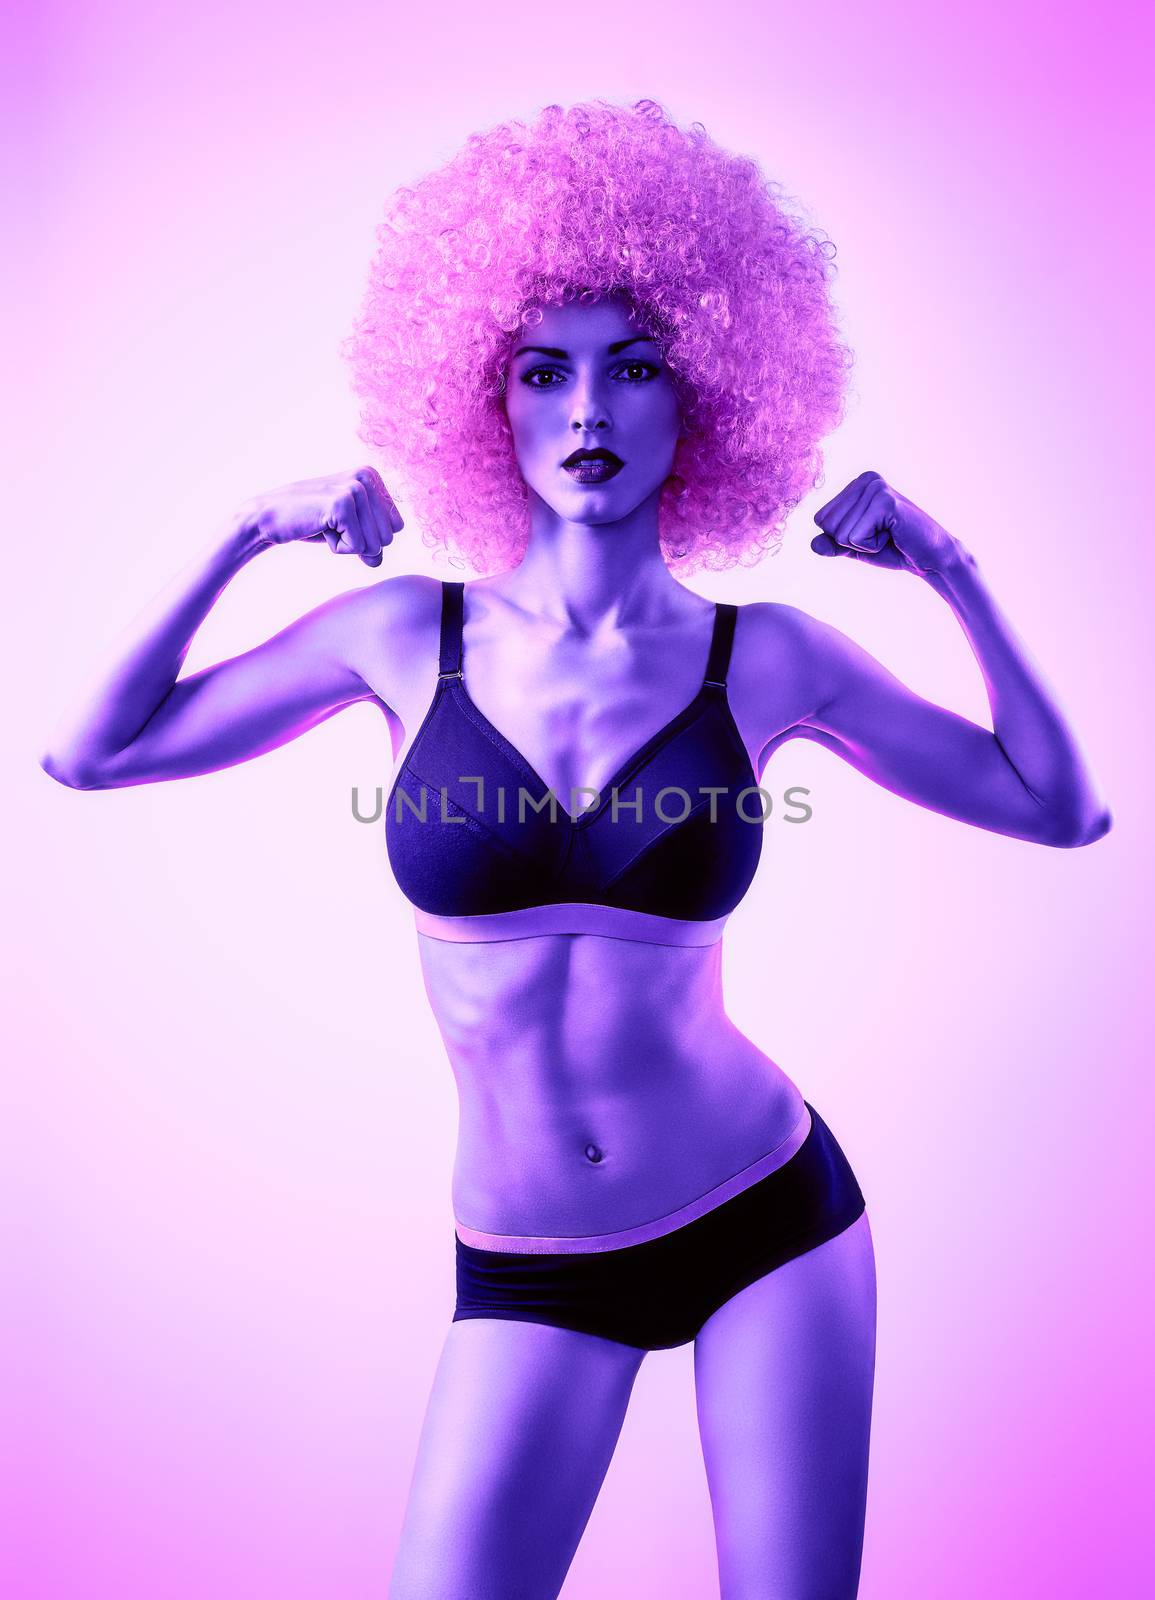 Beauty fashion. Fitness woman, unusual look. Sexy athletic body, people. Provocative attractive girl posing in trendy sport bra, shorts with afro hairstyle, purple background, copyspace, toned